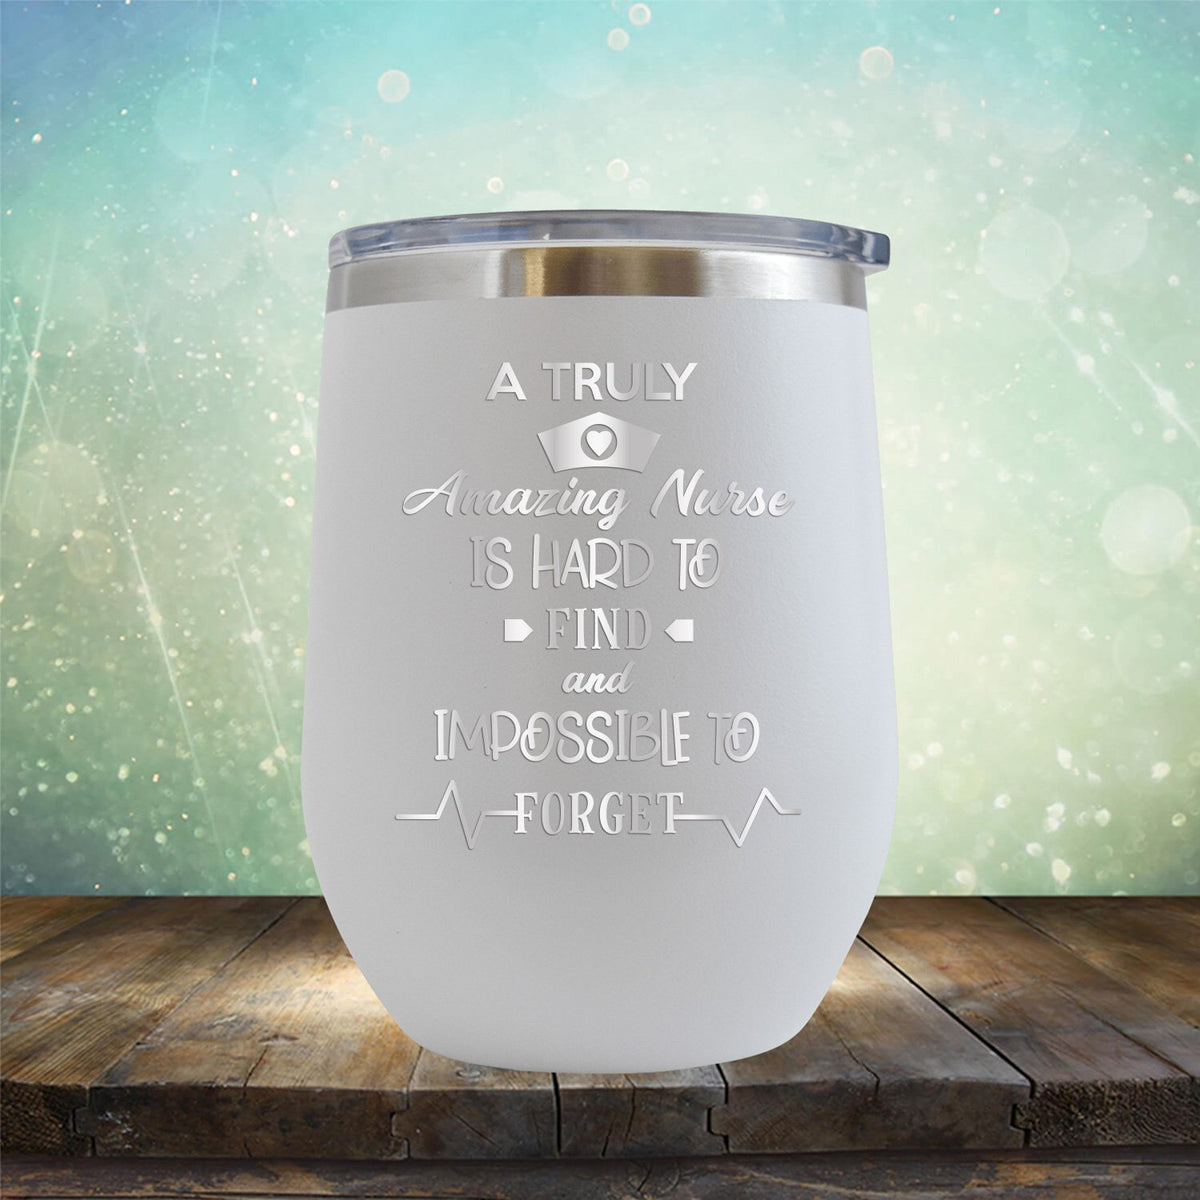 A Truly Amazing Nurse is Hard to Find and Impossible to Forget - Stemless Wine Cup